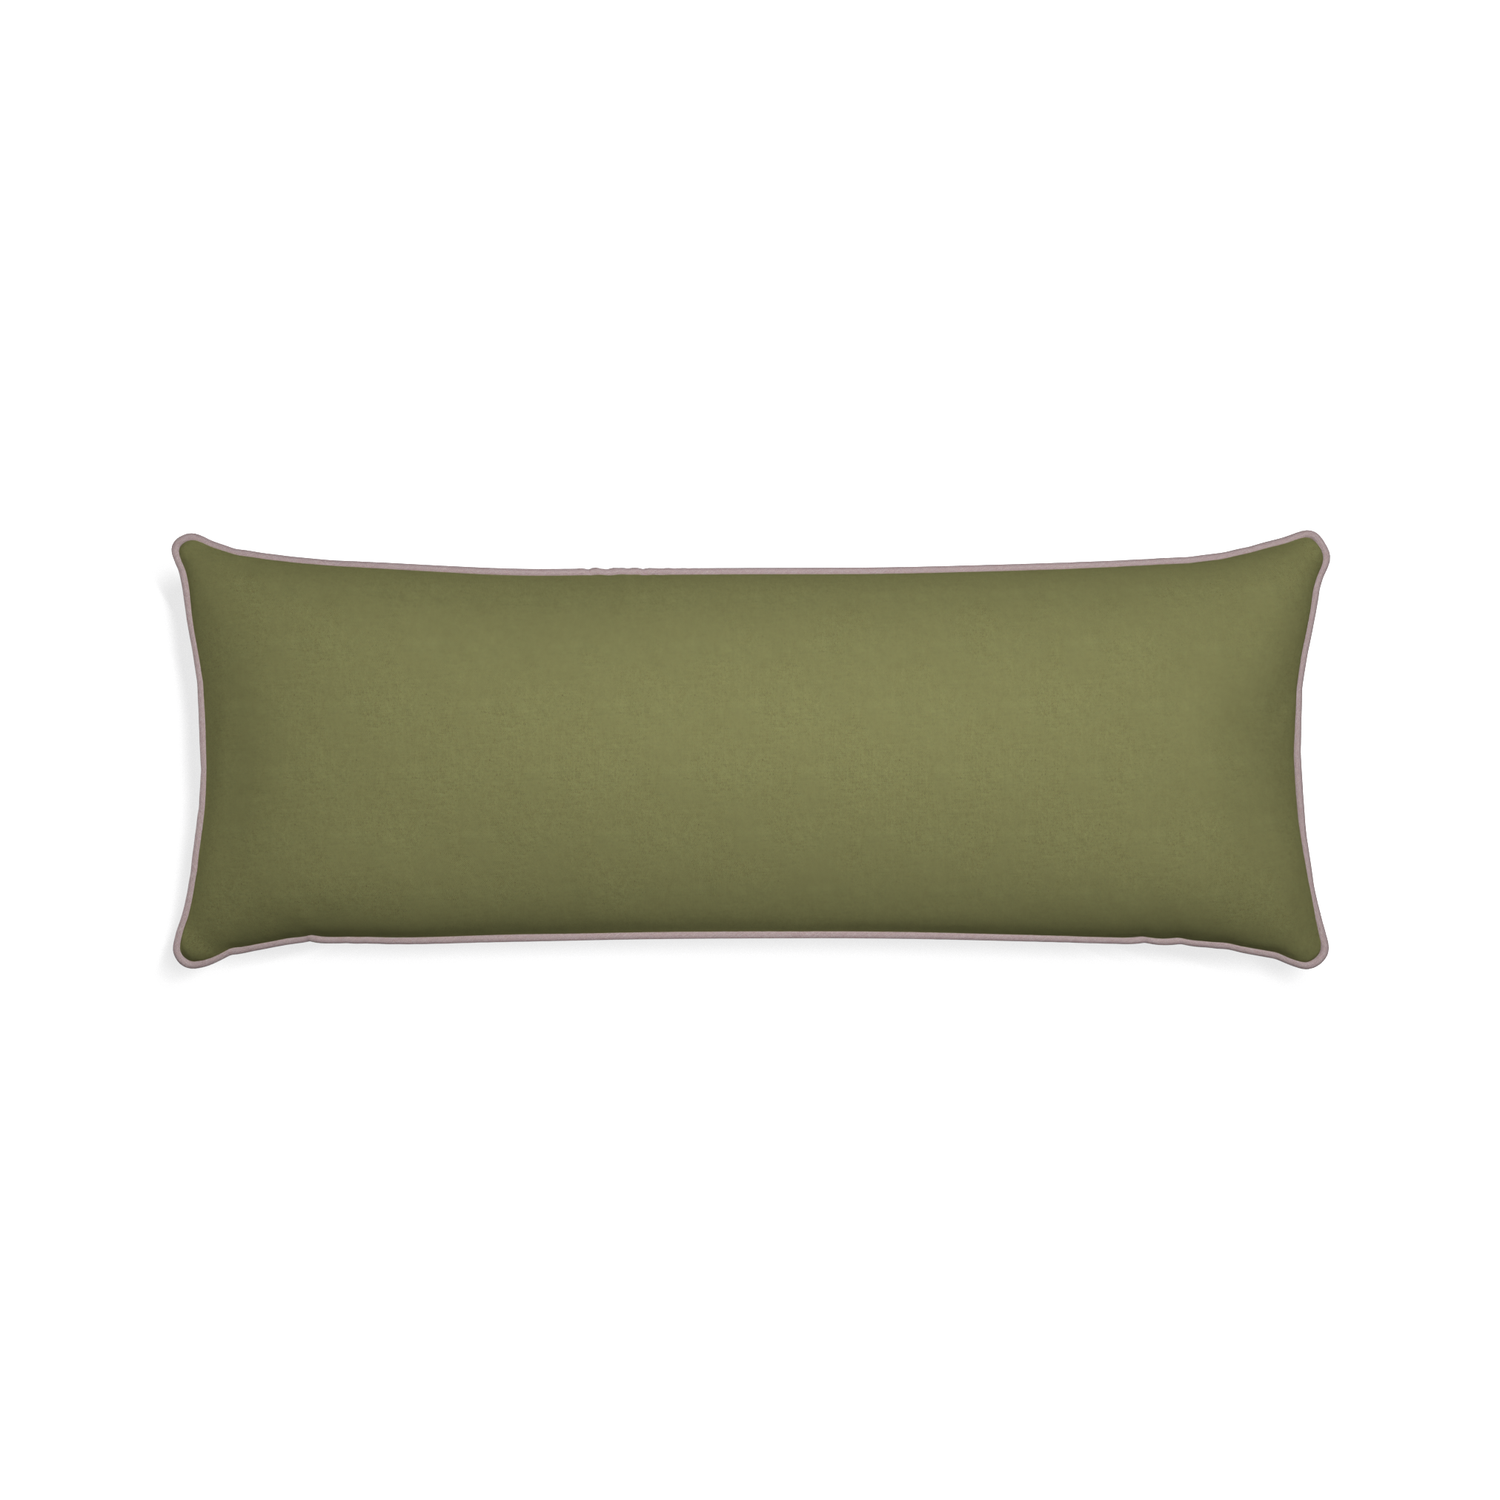 Xl-lumbar moss custom moss greenpillow with orchid piping on white background